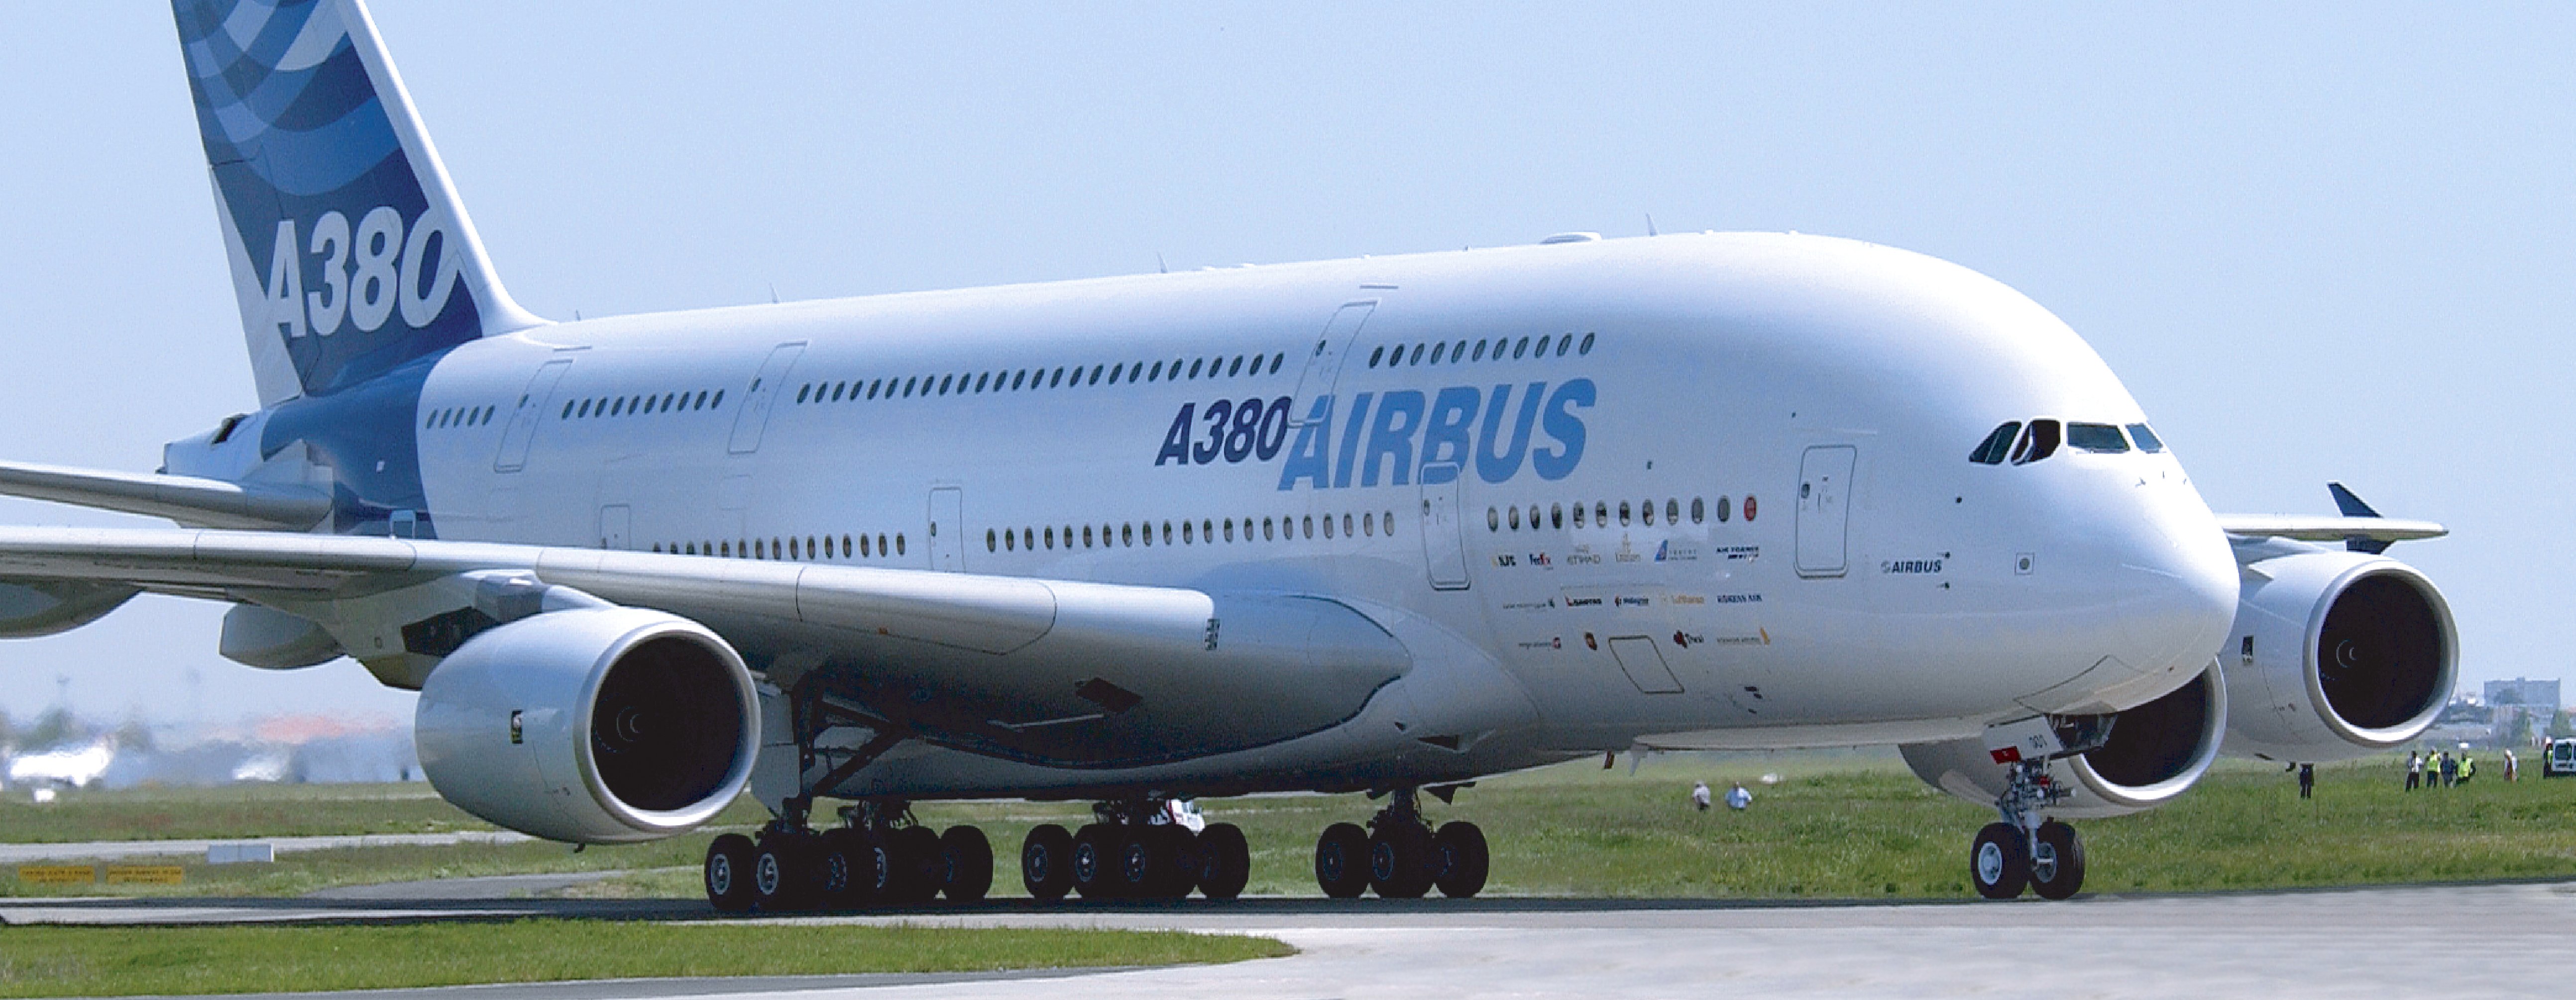 airbus, A380, Airliner, Plane, Airplane, Transport,  59 Wallpaper